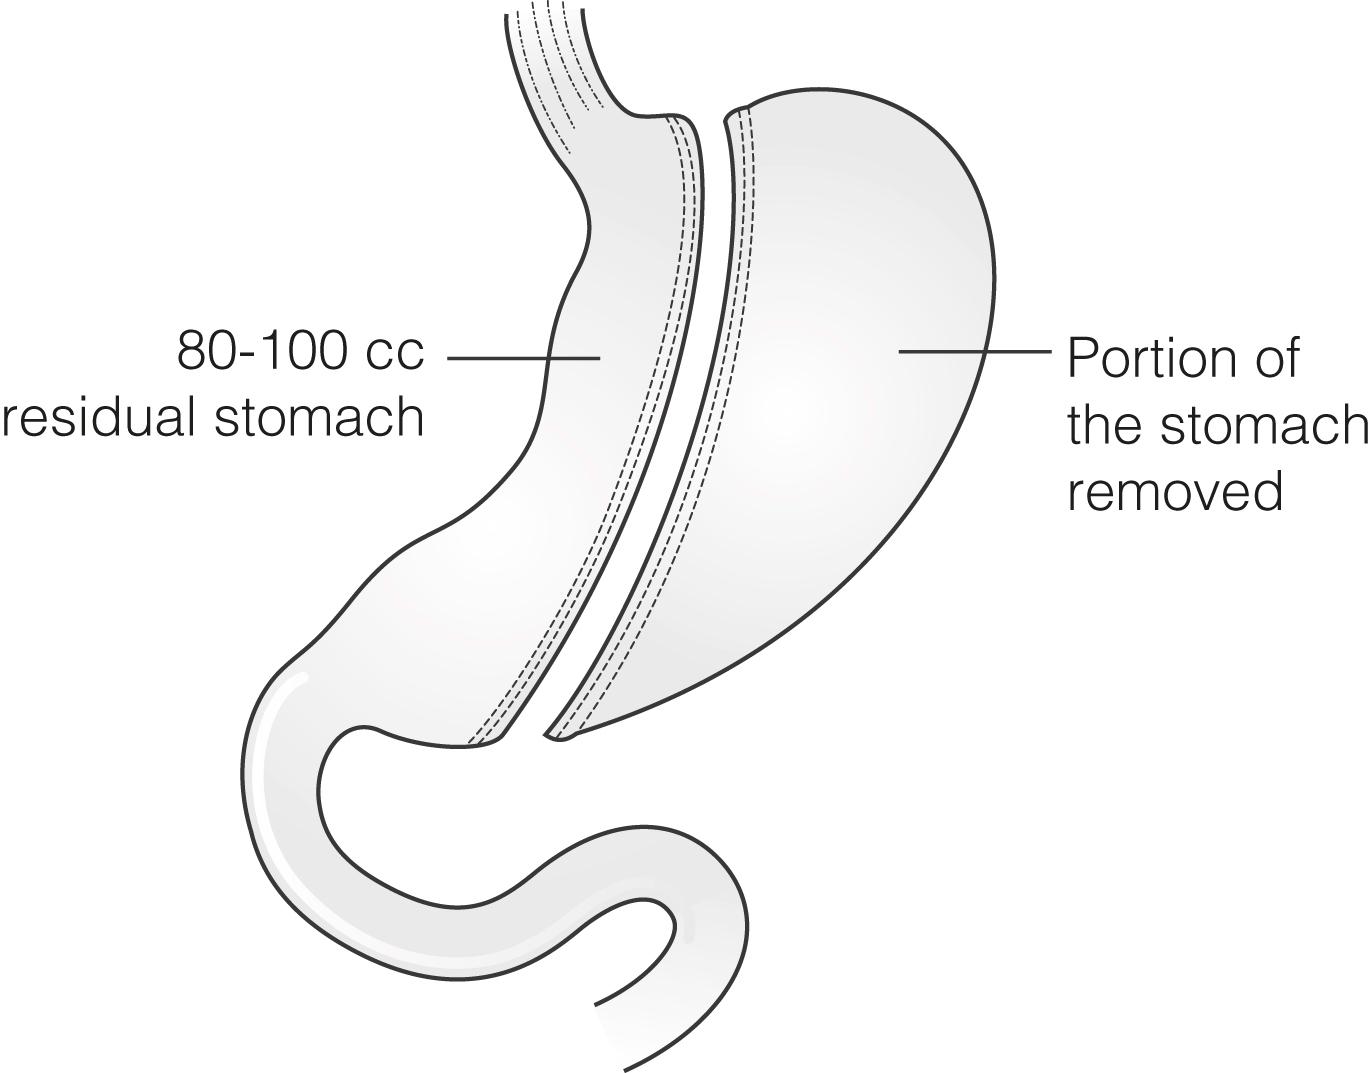 Figure 21.4, Diagram of sleeve gastrectomy. The omentum (not shown) is preserved on the gastro-epiploic arcade.